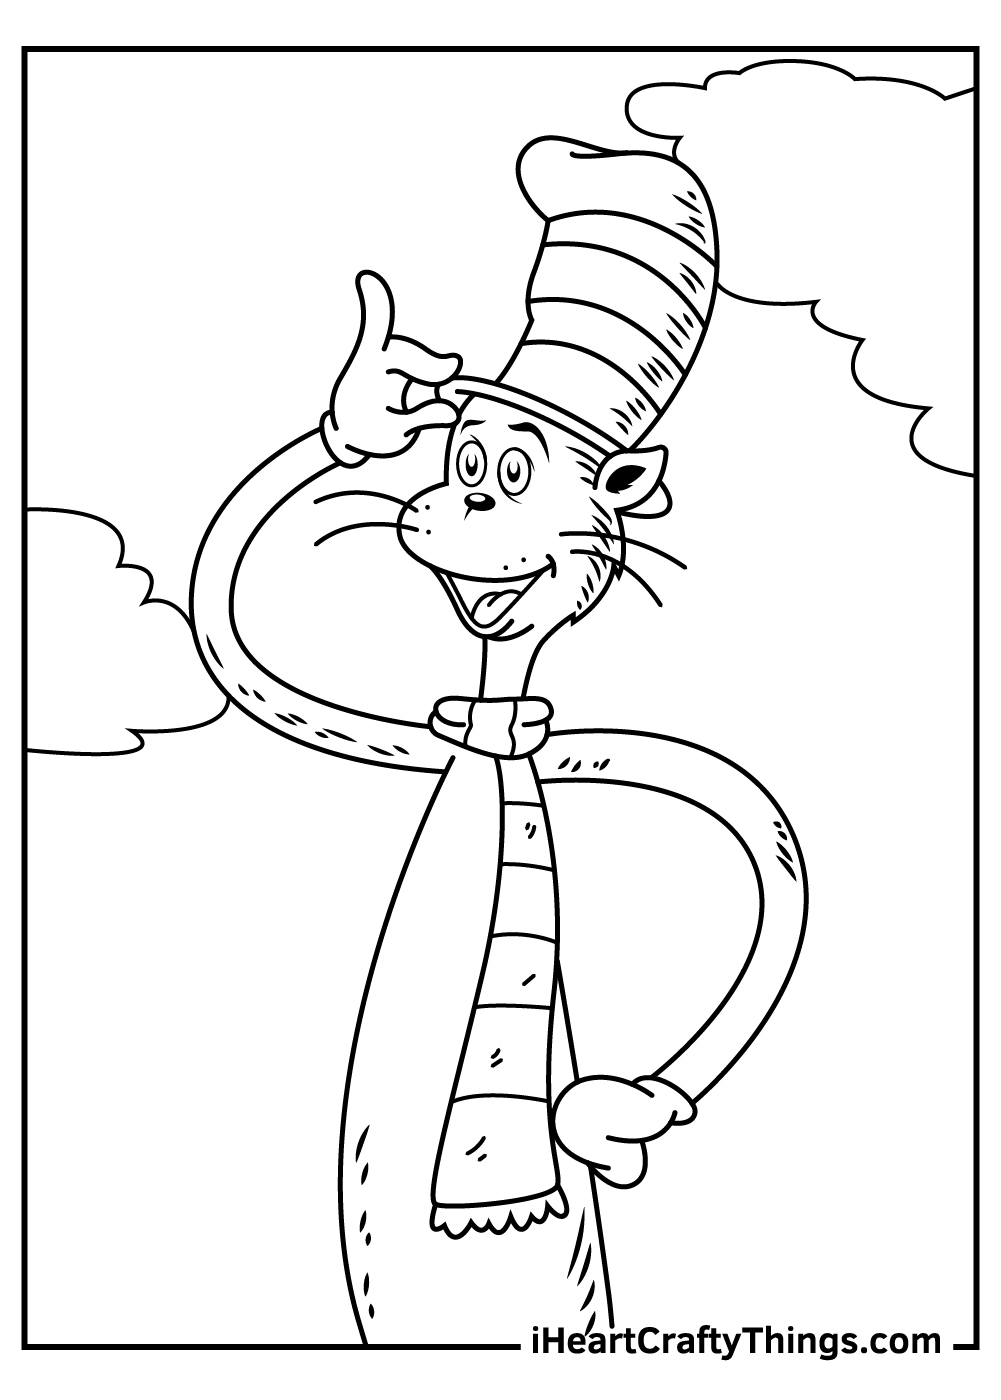 Cat In The Hat Coloring Pages 100 Free Printables - Free Printable Cat In The Hat Pictures